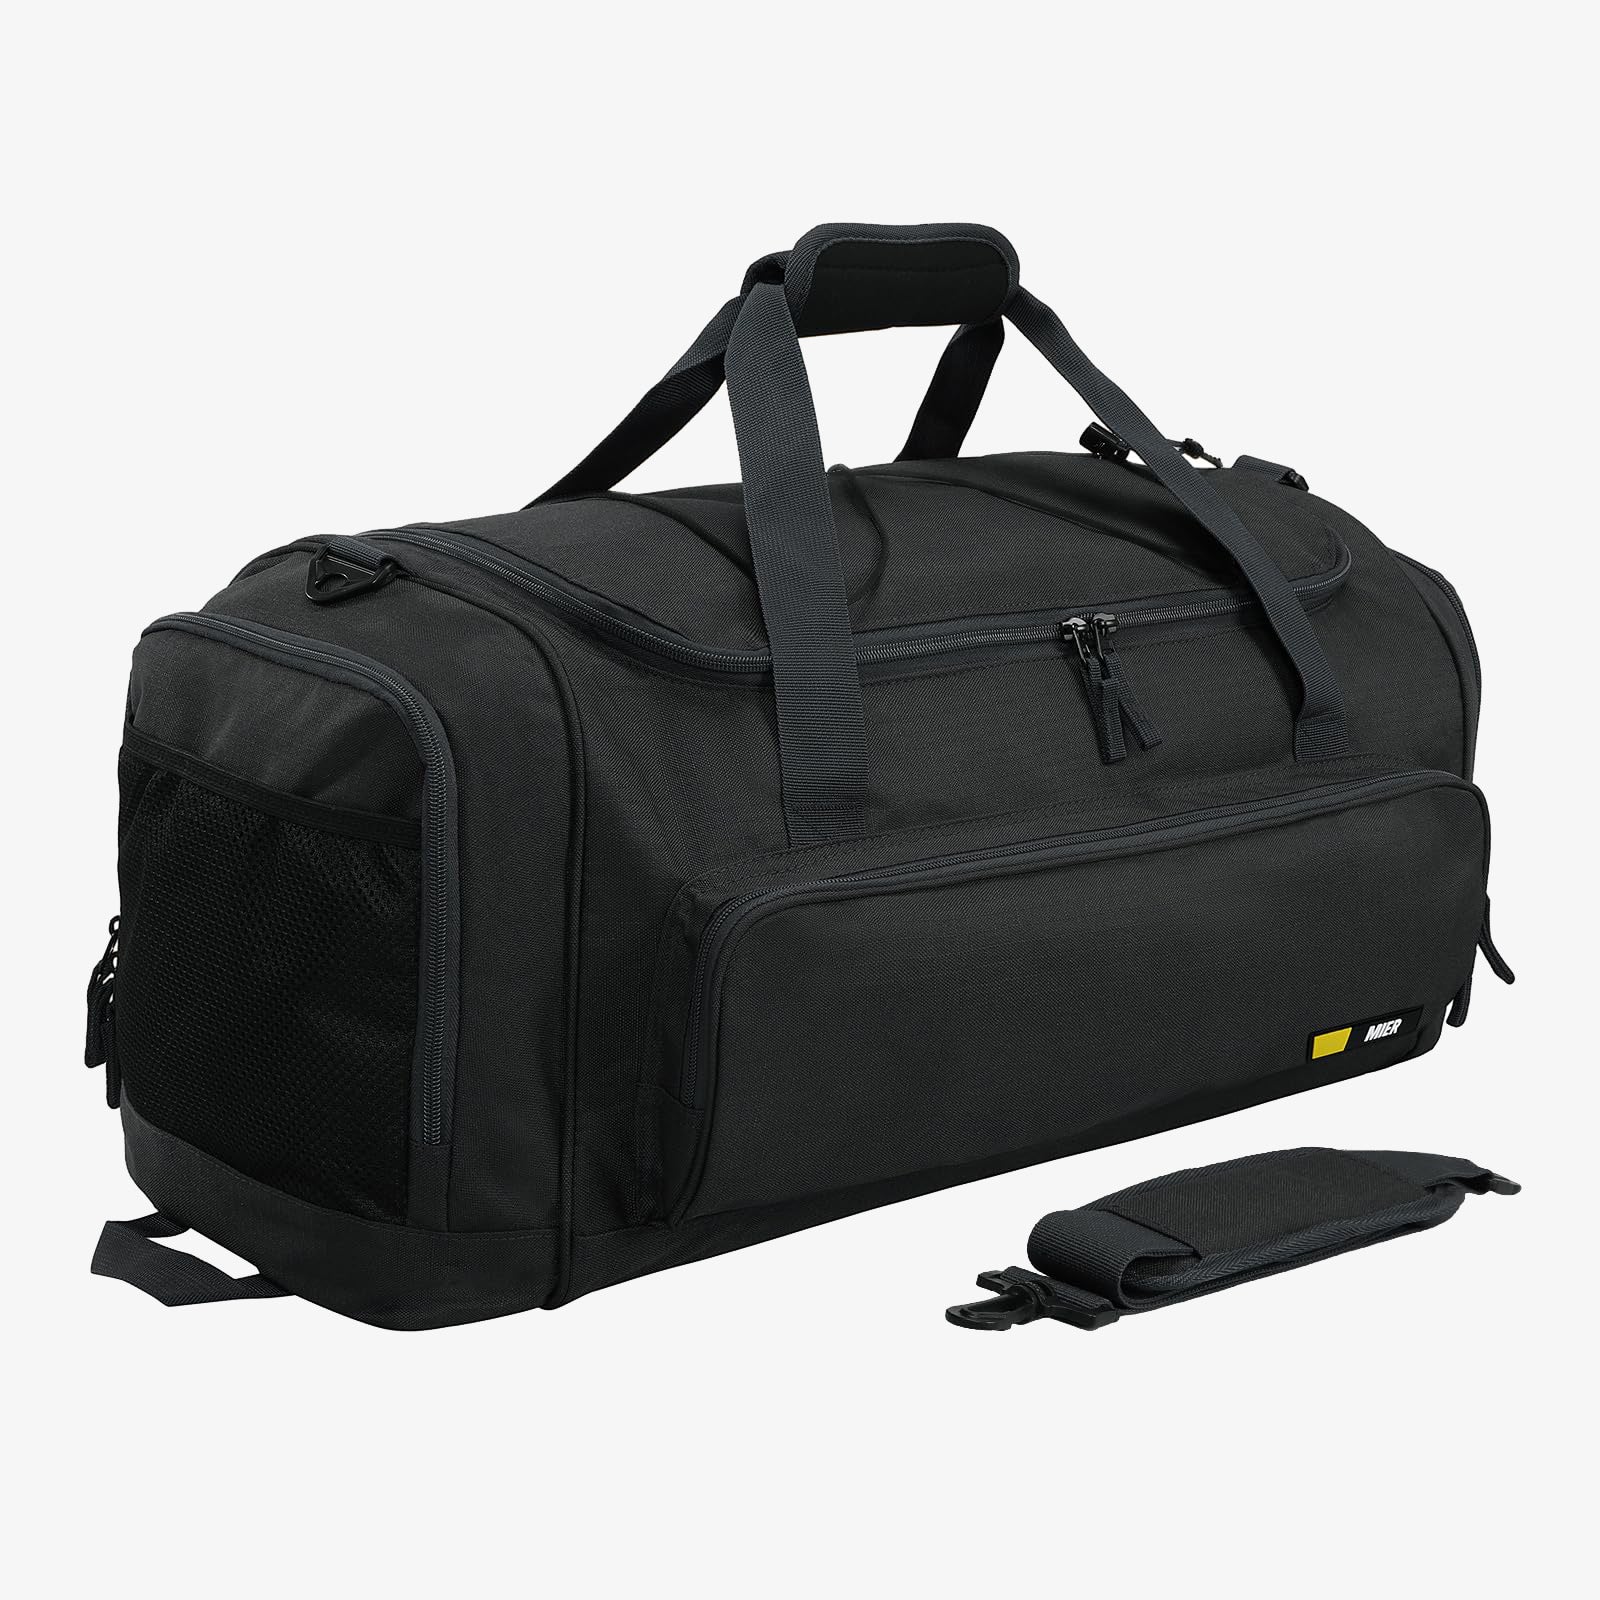 Large Sports Gym Bag Duffel Bag with Shoe Compartment